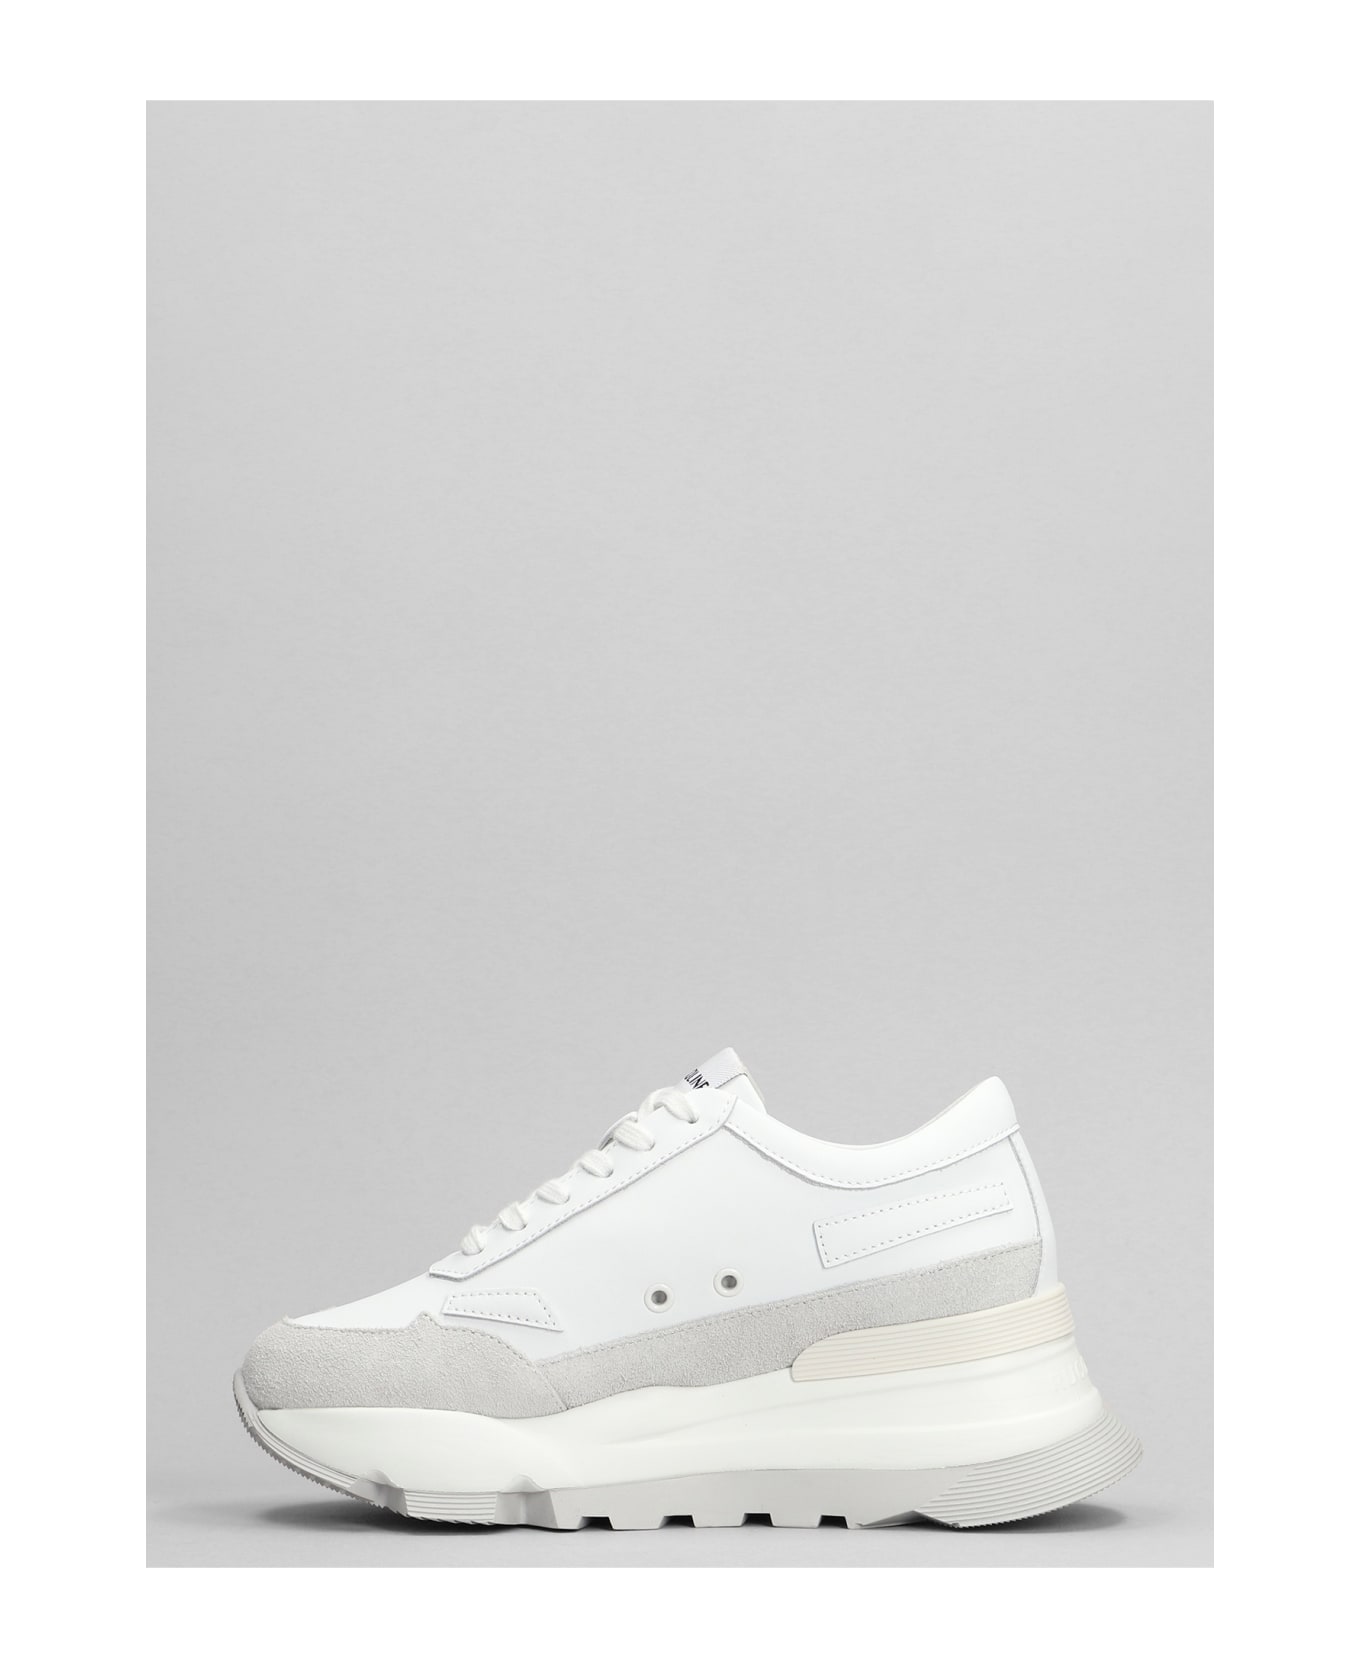 Ruco Line Aki Sneakers In White Suede And Leather - white スニーカー